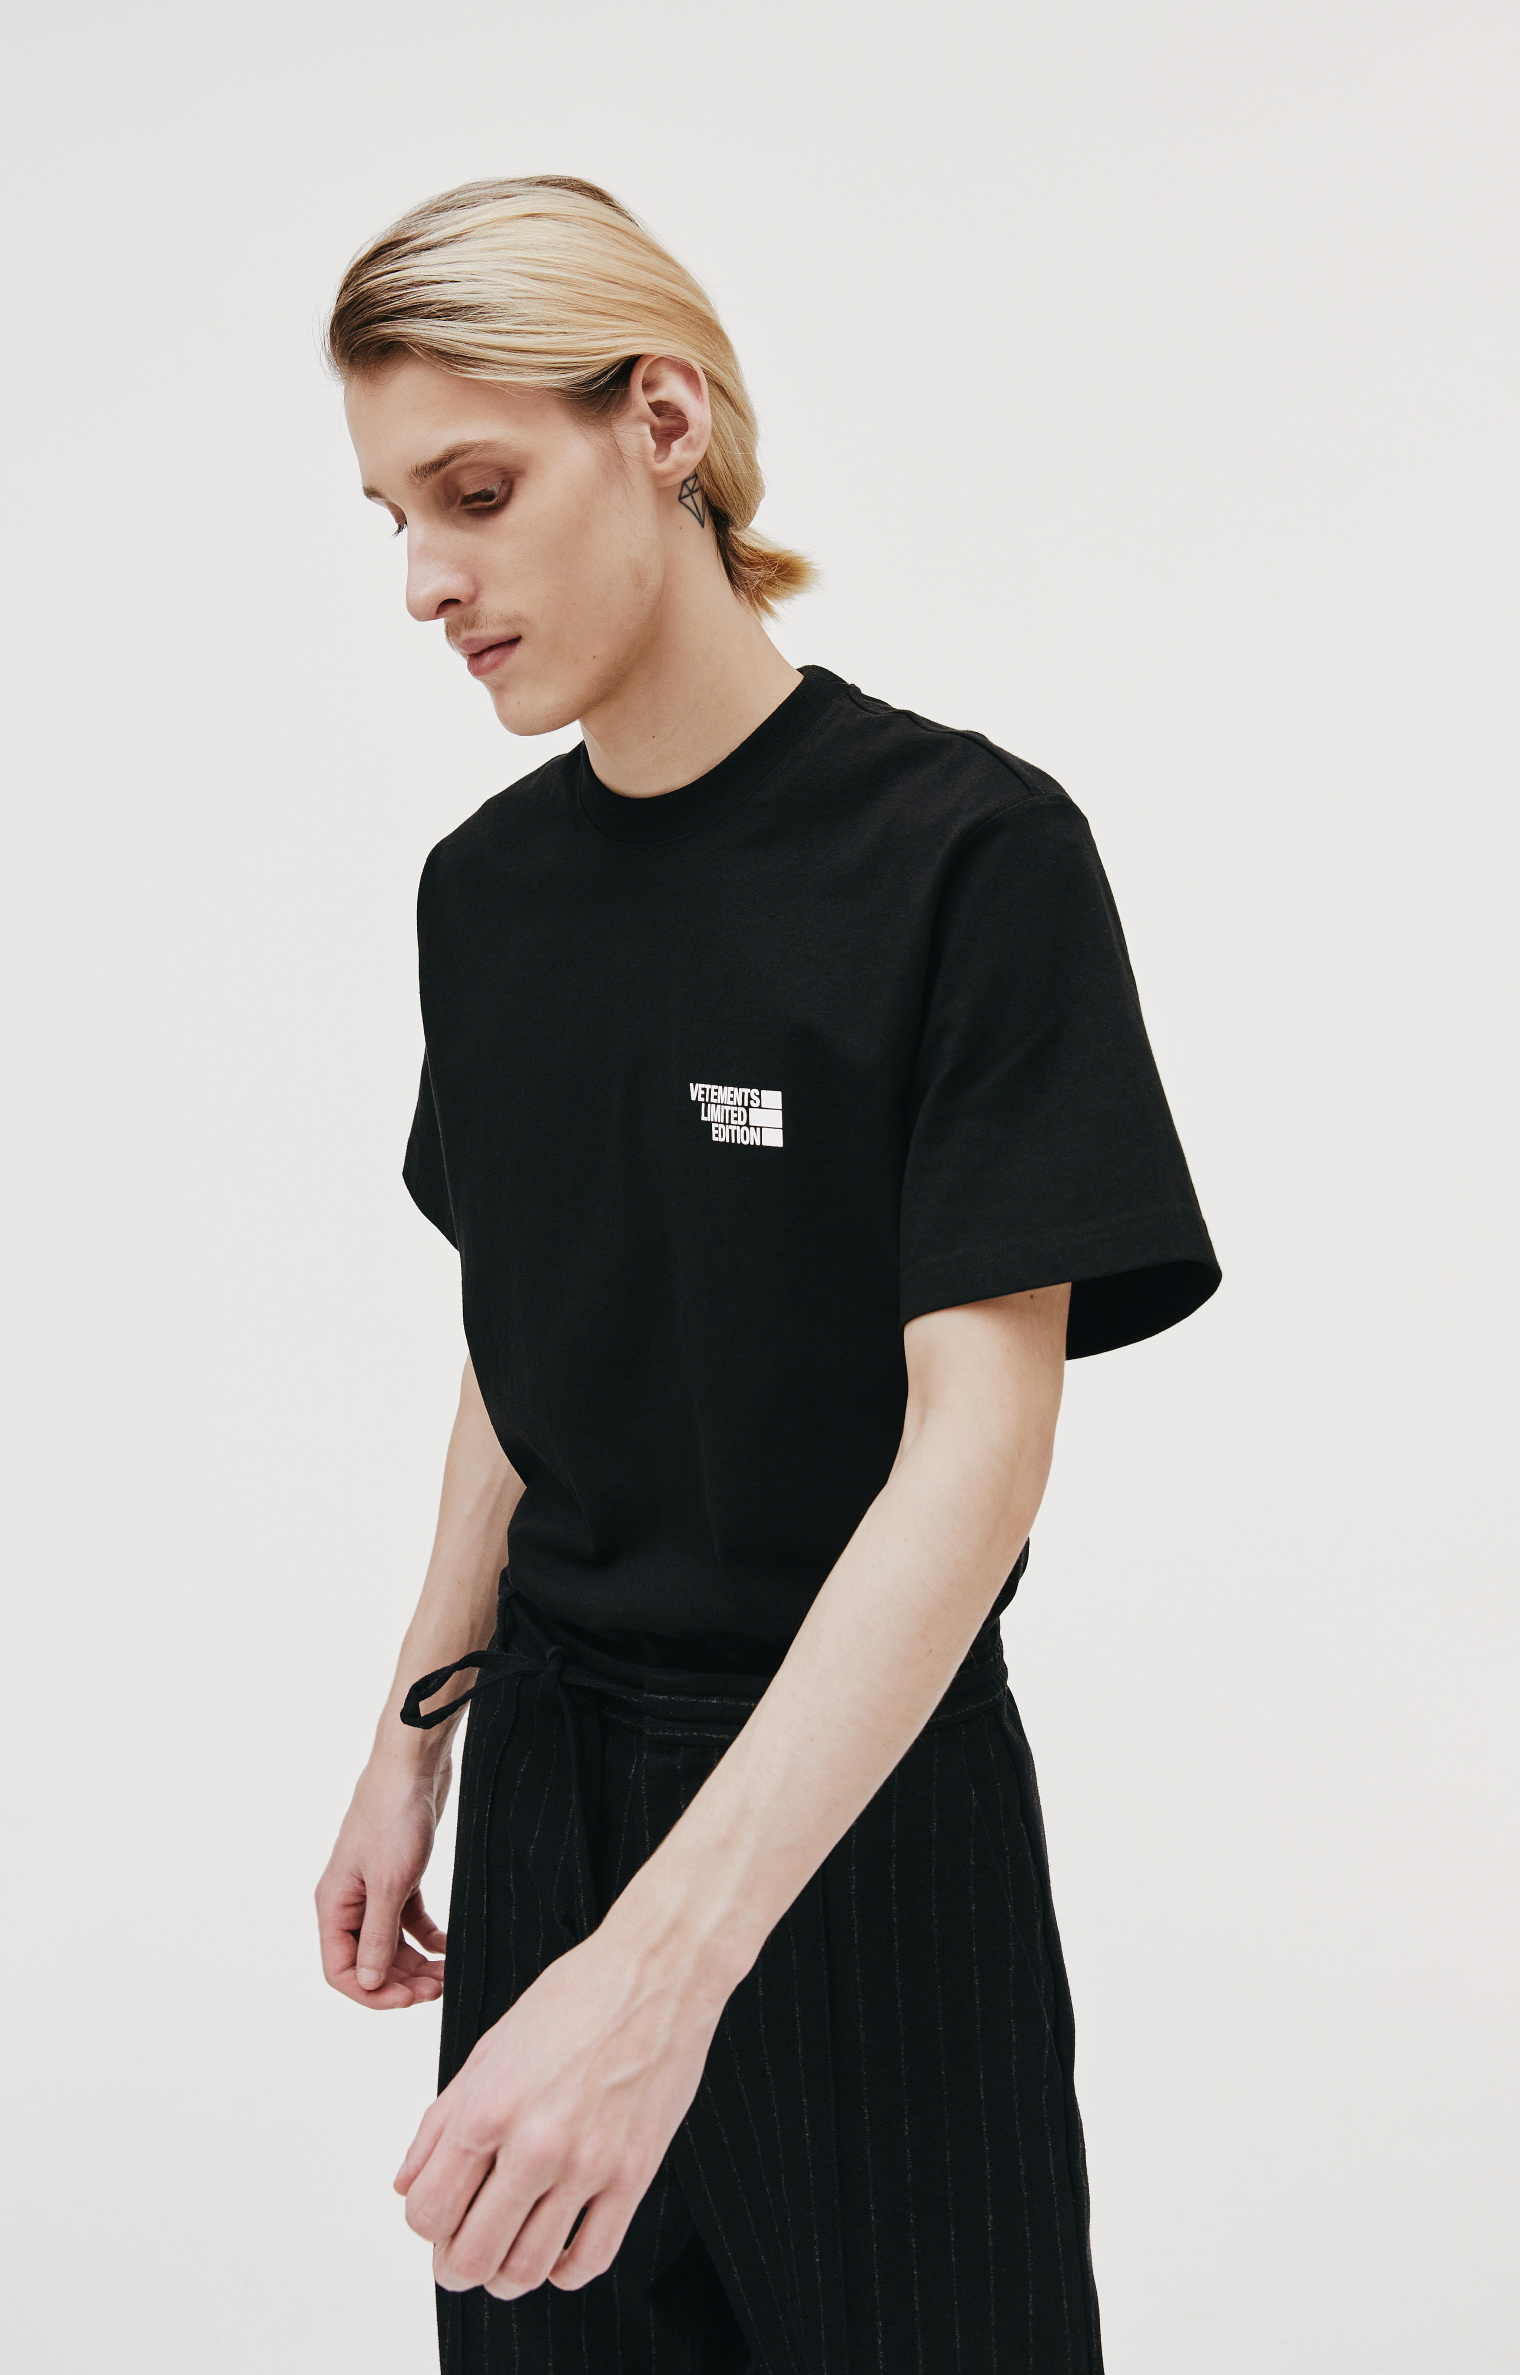 VETEMENTS Black Limited Edition Printed T-shirt